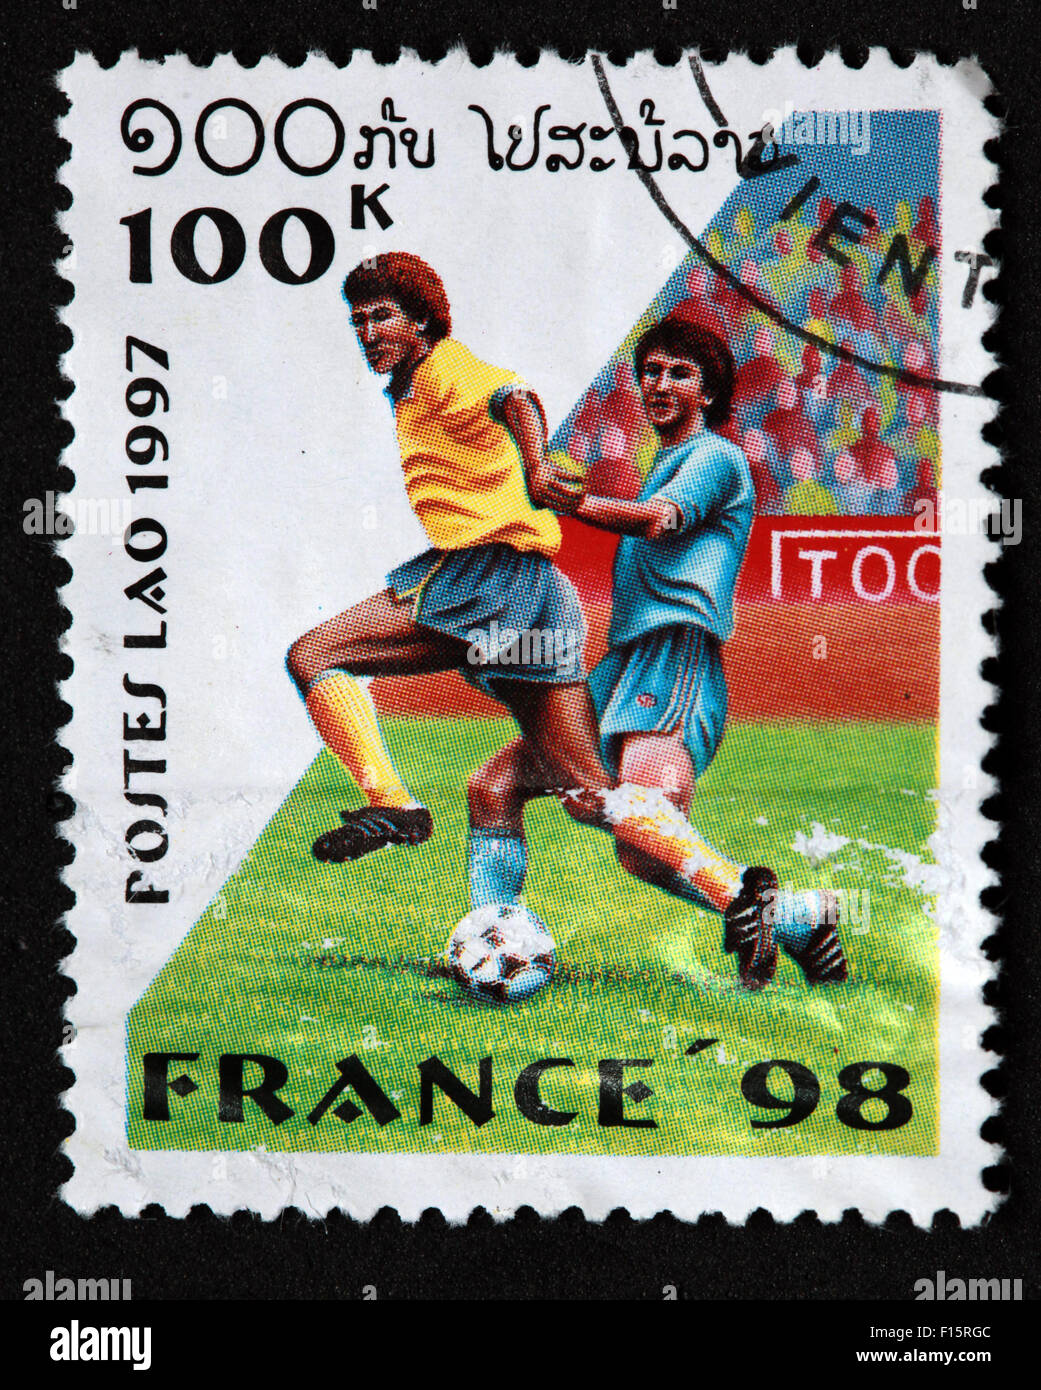 Postes Lao Laos 100K France 1998 98 football deportes world Cup worldcup sport stamp Stock Photo